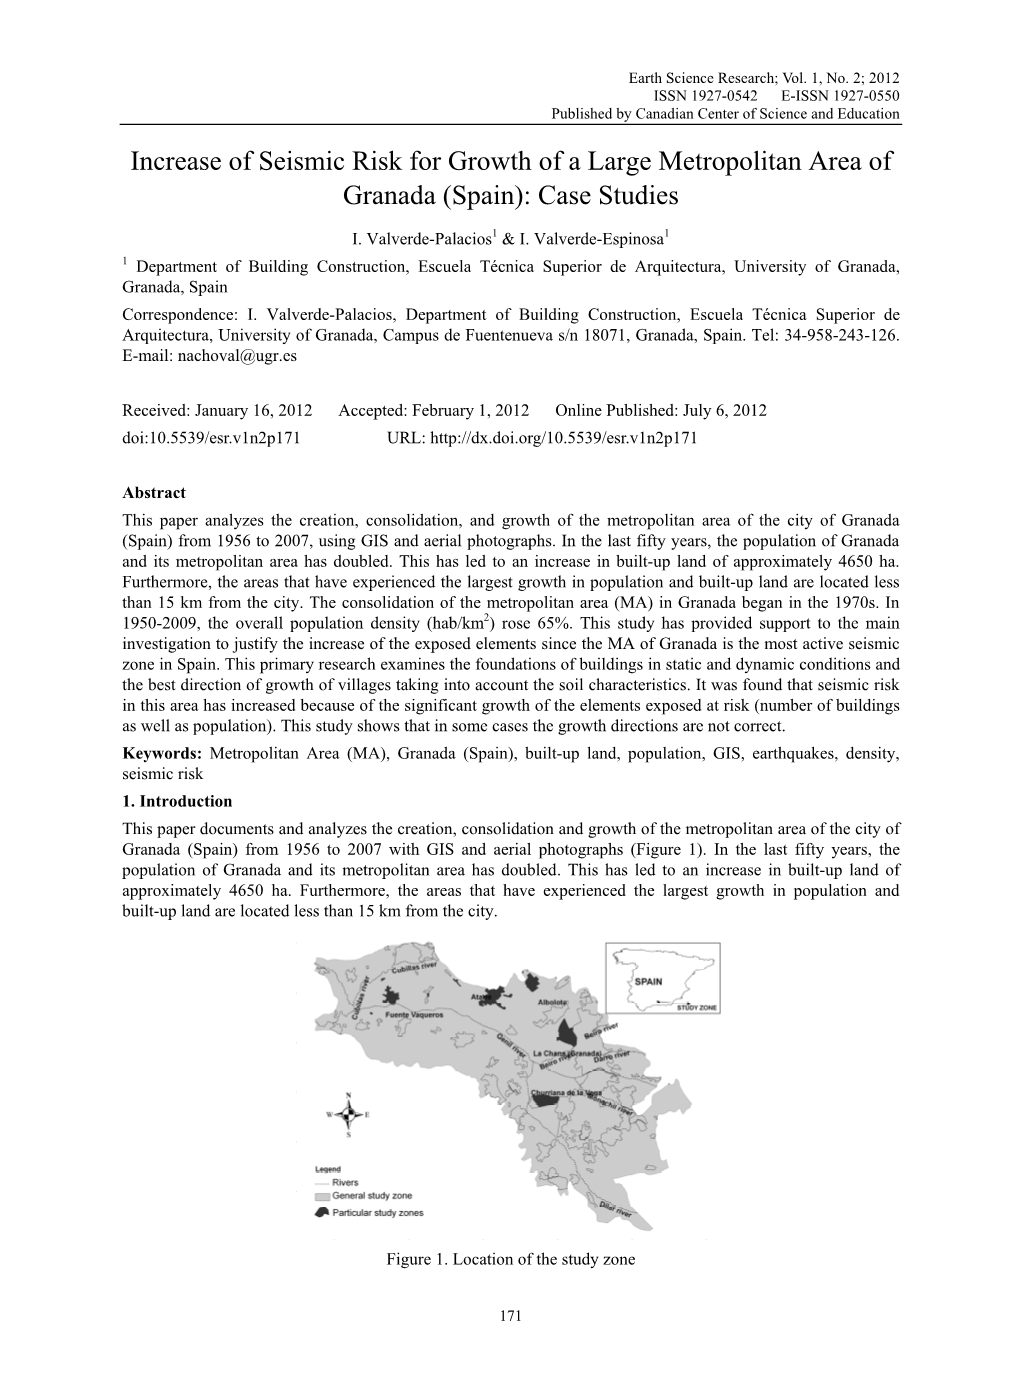 Increase of Seismic Risk for Growth of a Large Metropolitan Area of Granada (Spain): Case Studies